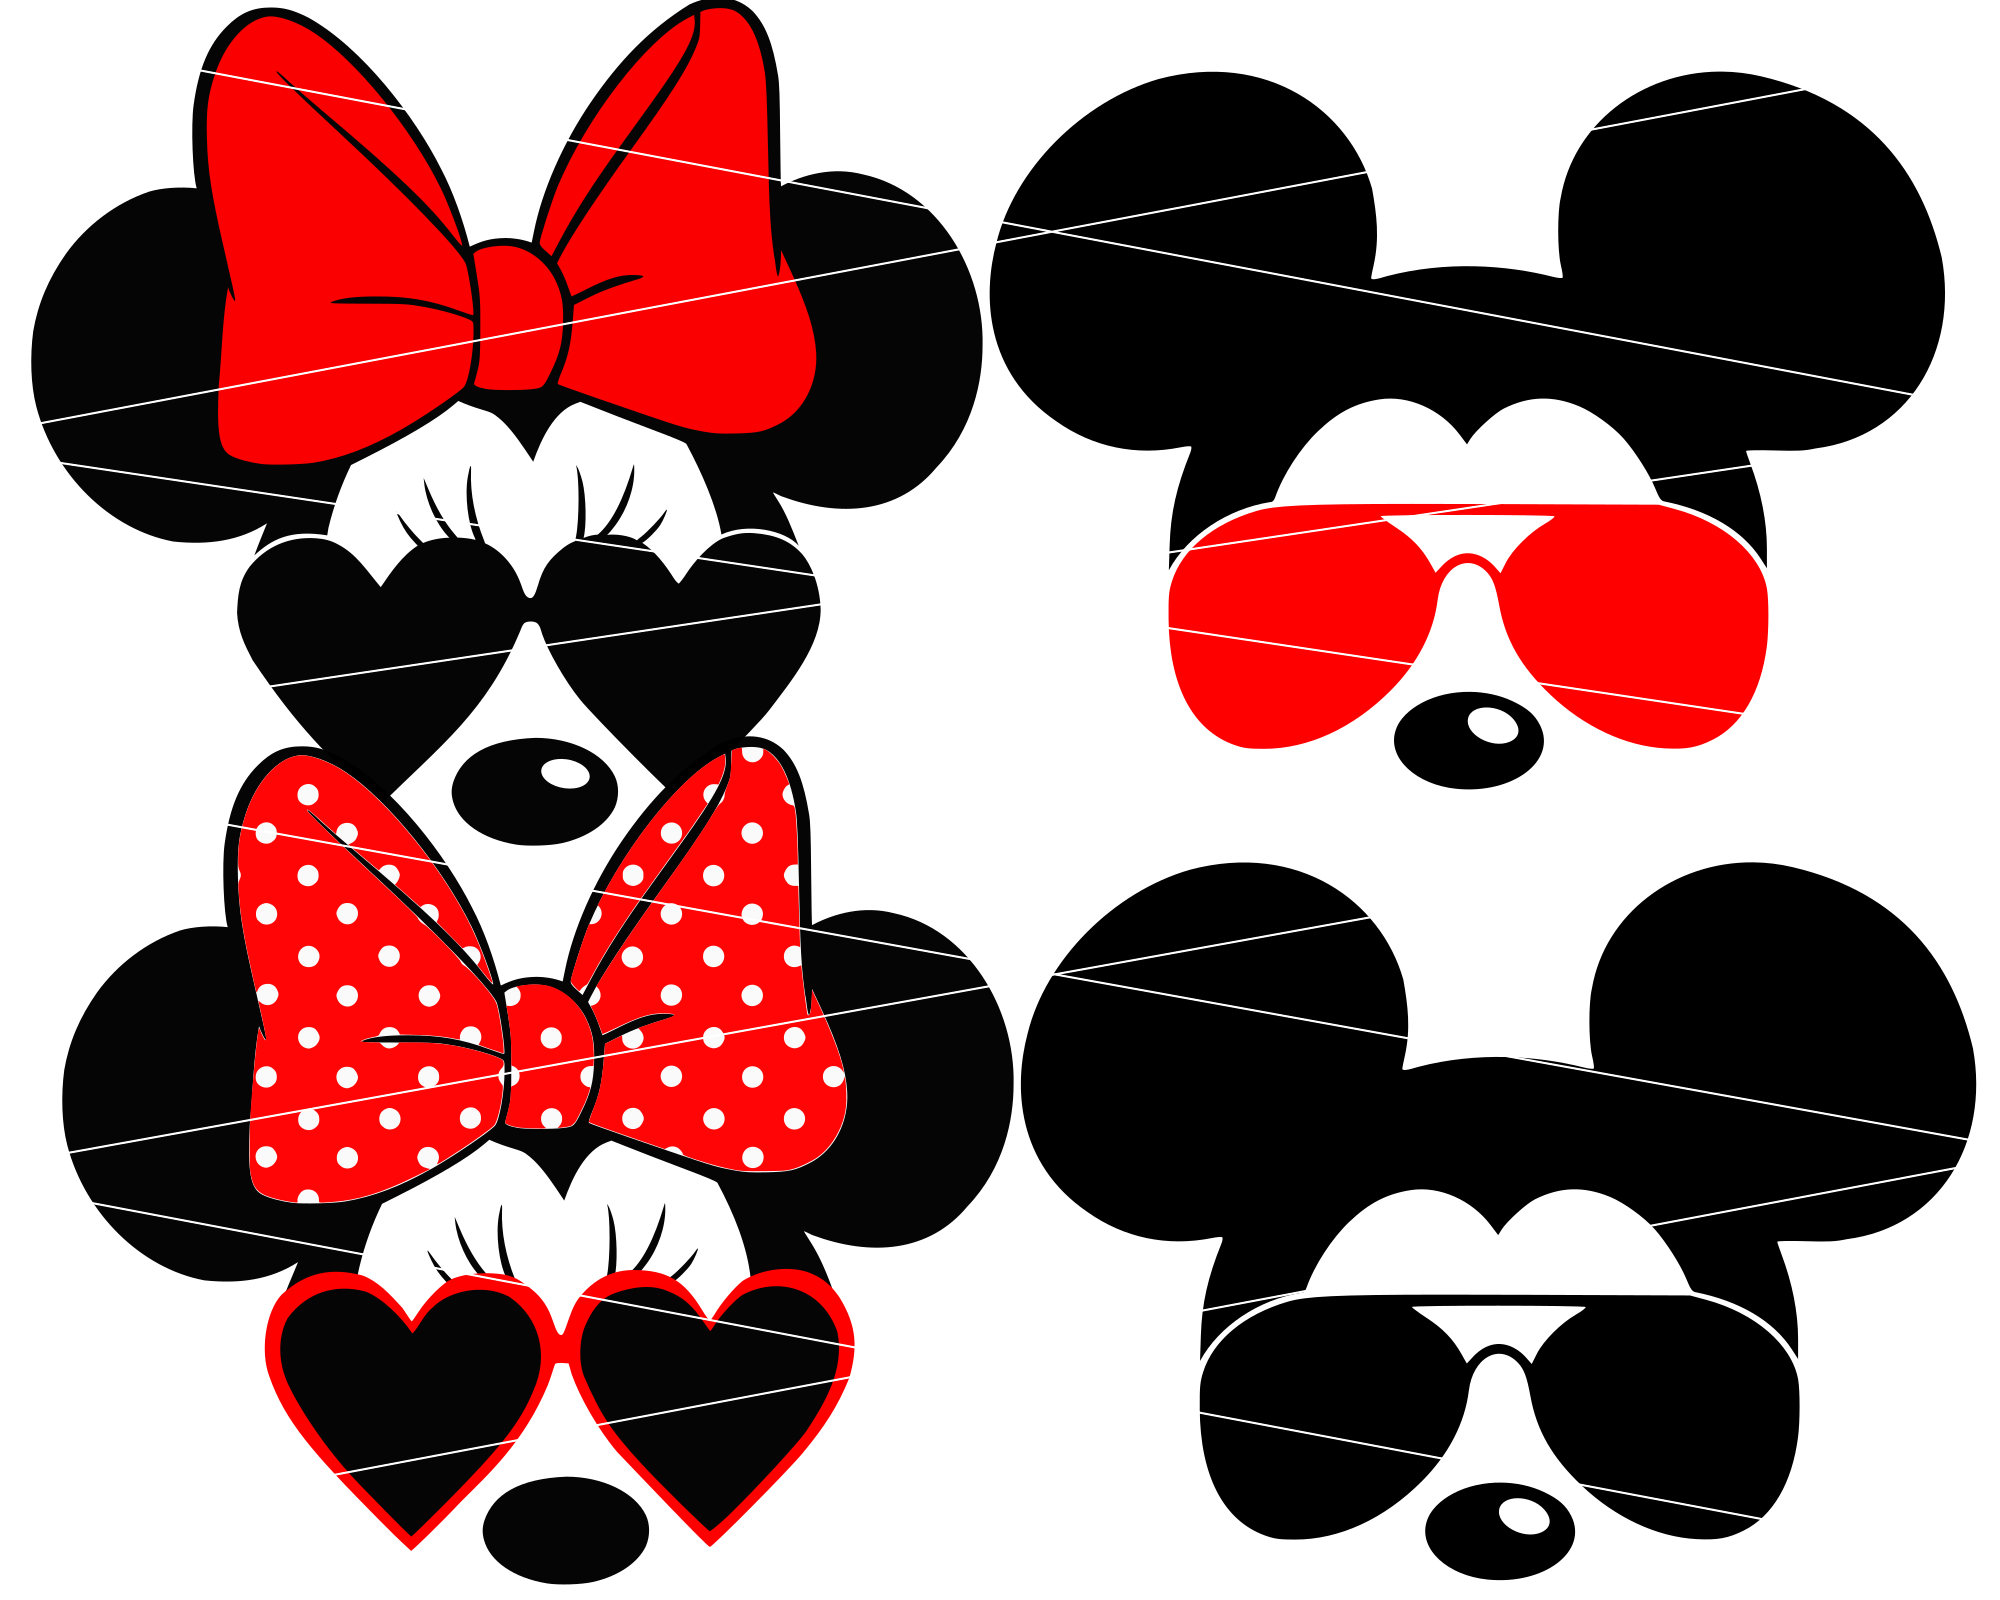 Download Free SVG Cut File - Minnie Mouse Monogram Svg Clipart in 2020 Mono...